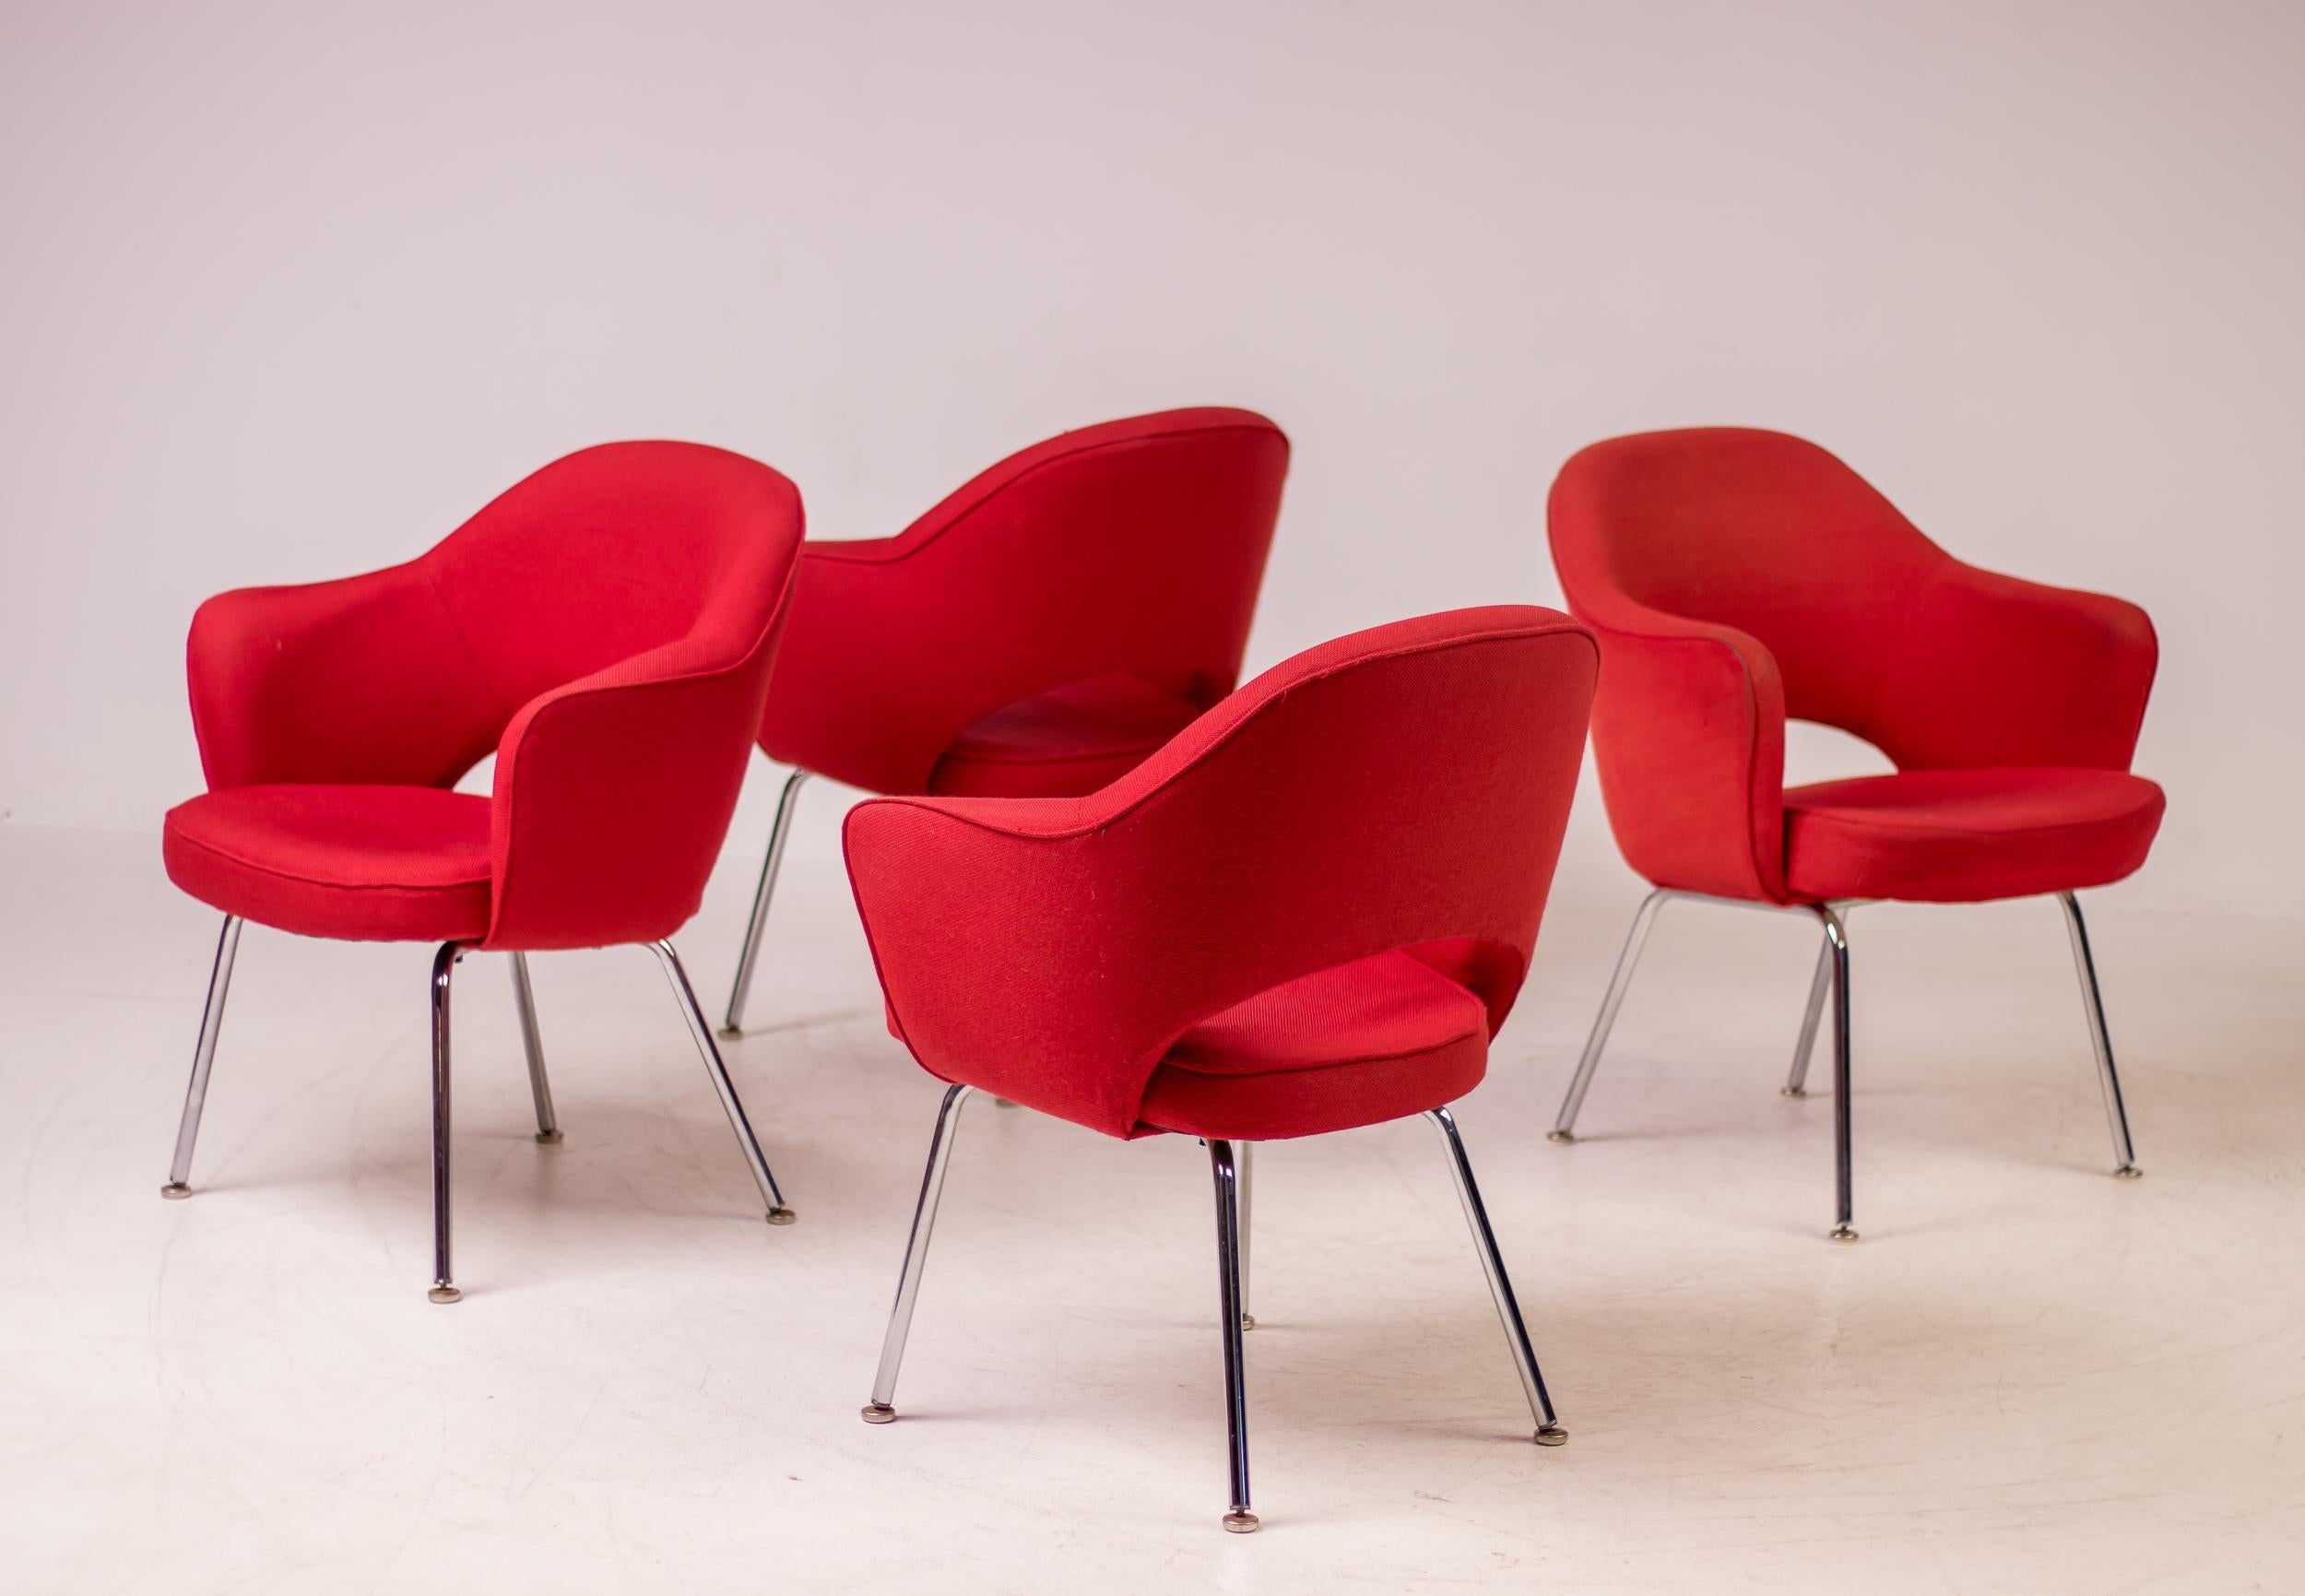 Featured in nearly all Florence Knoll-designed interiors, the Saarinen Executive Chair has remained one of Knoll's most popular designs for nearly 70 years. The design, which is now found in dining rooms as often as it is in offices, transformed the